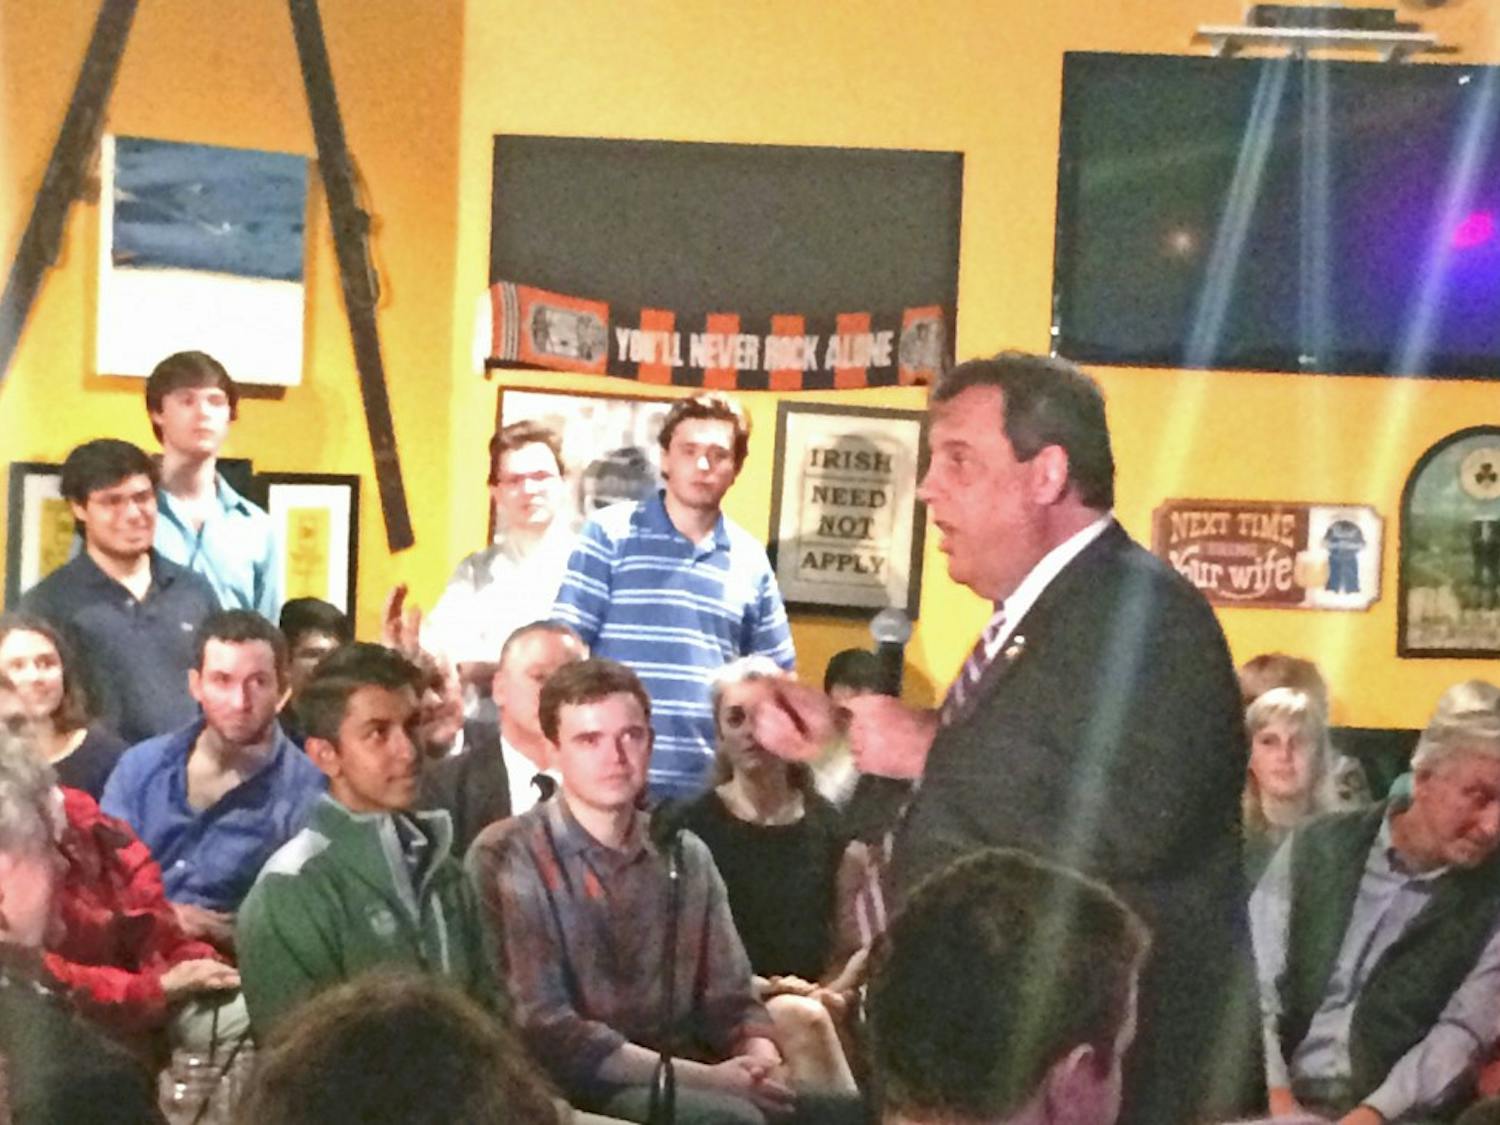 Republican presidential candidate Gov. Chris Christie (R-N.J.) spoke to a crowd on Friday.